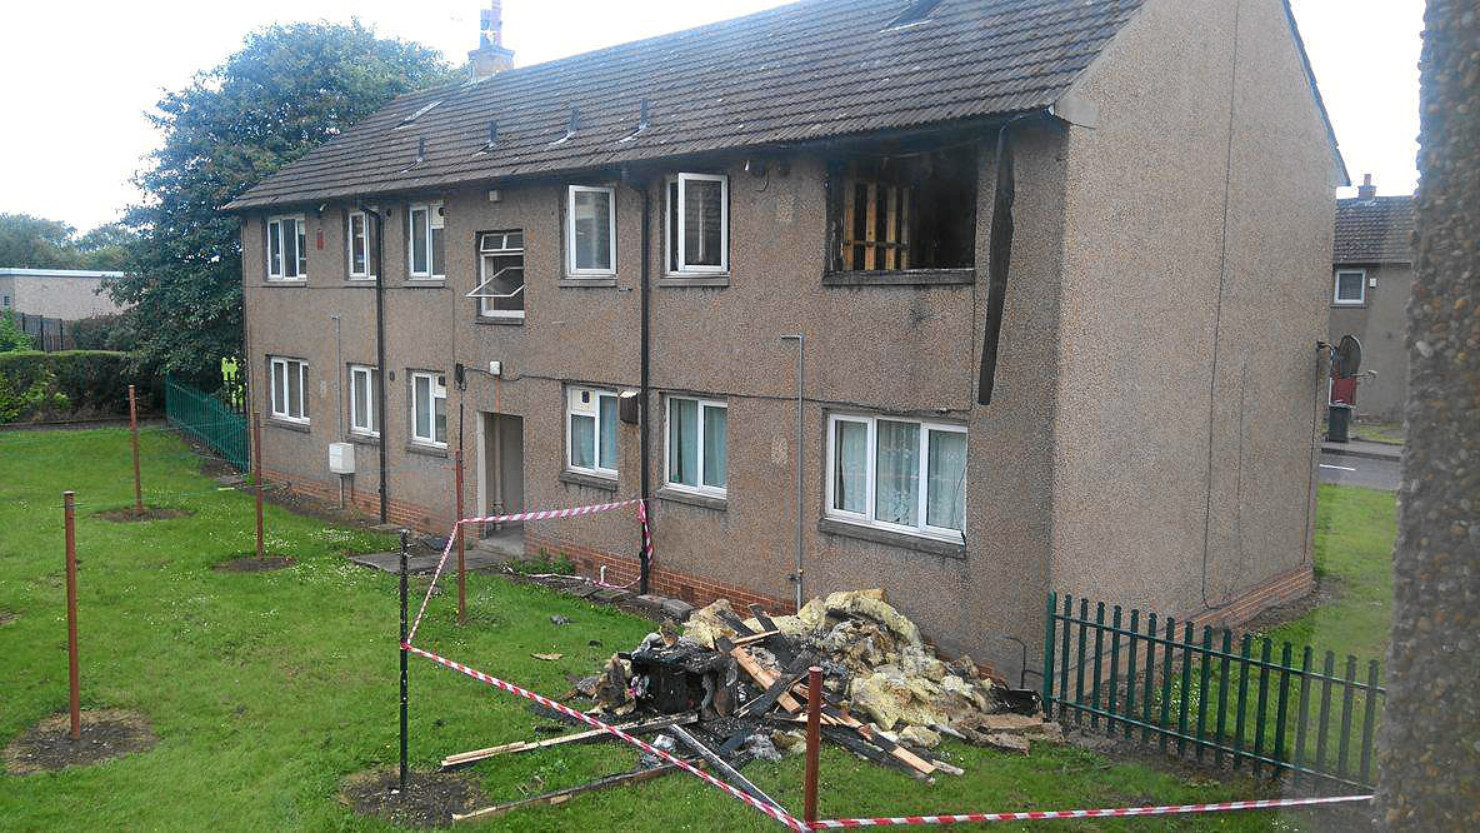 The burnt out flat on Banchory Road.